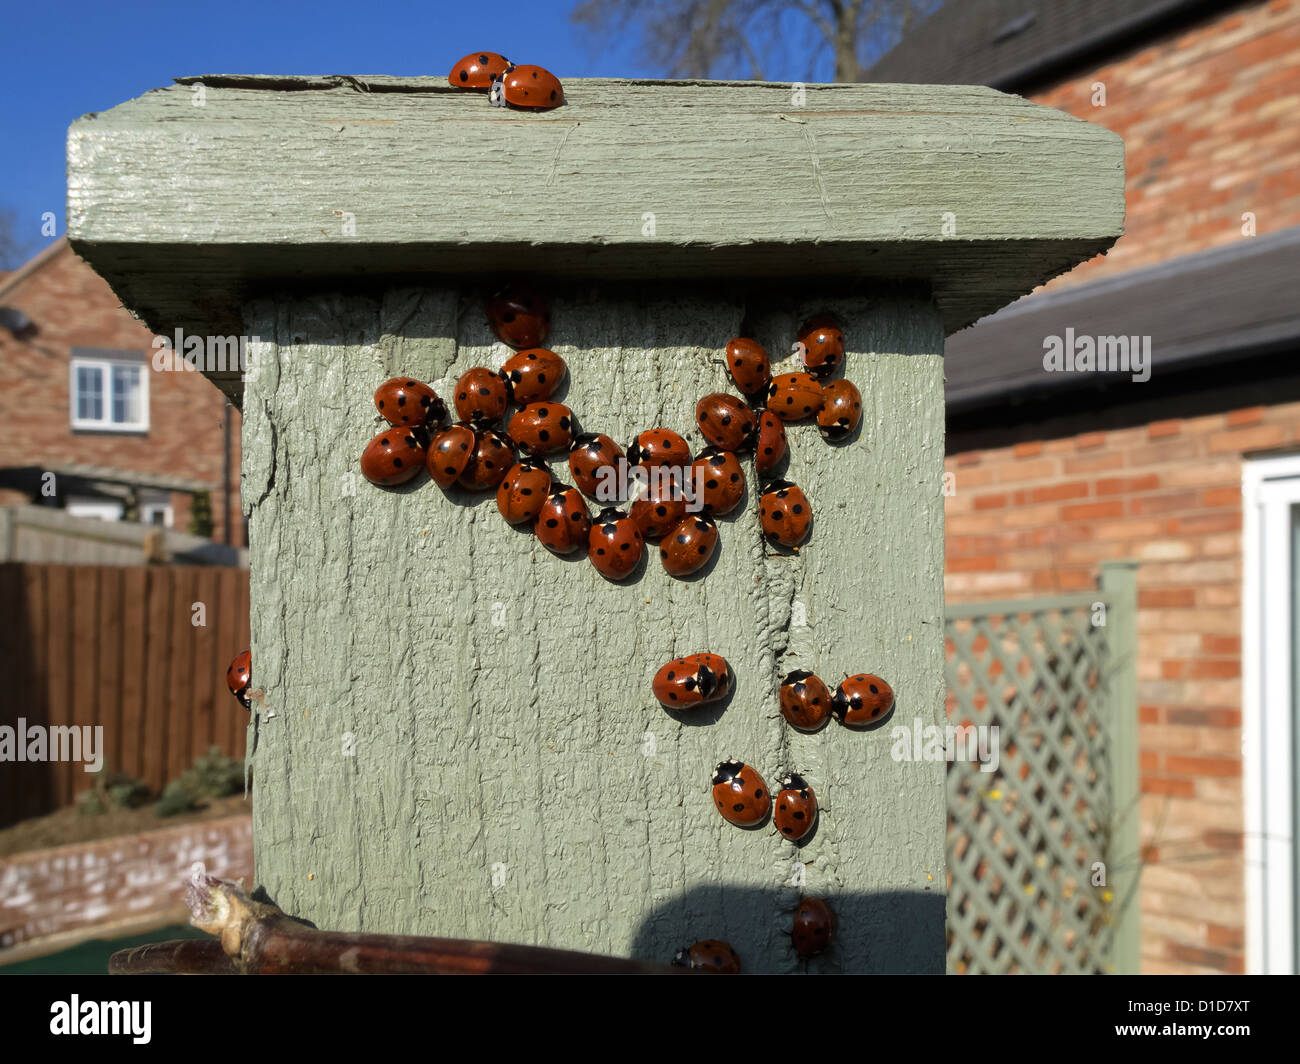 A loveliness of 7 spot 'Coccinella septempunctata' ladybirds warming themselves on a sunlit fencepost, Leicestershire, England, UK Stock Photo